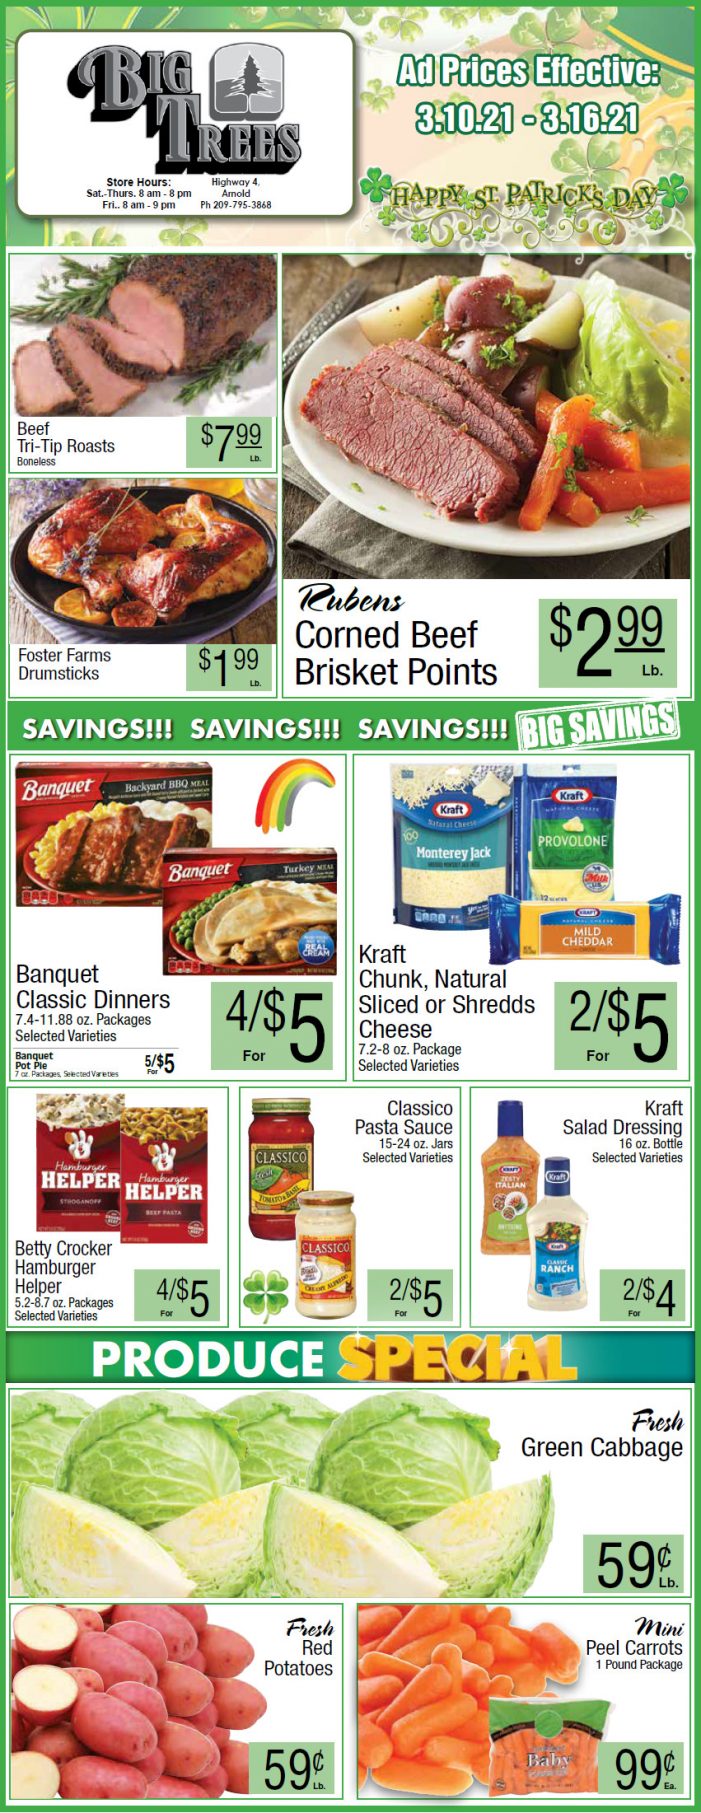 Big Trees Market Weekly Ad & Grocery Specials Through March 16th